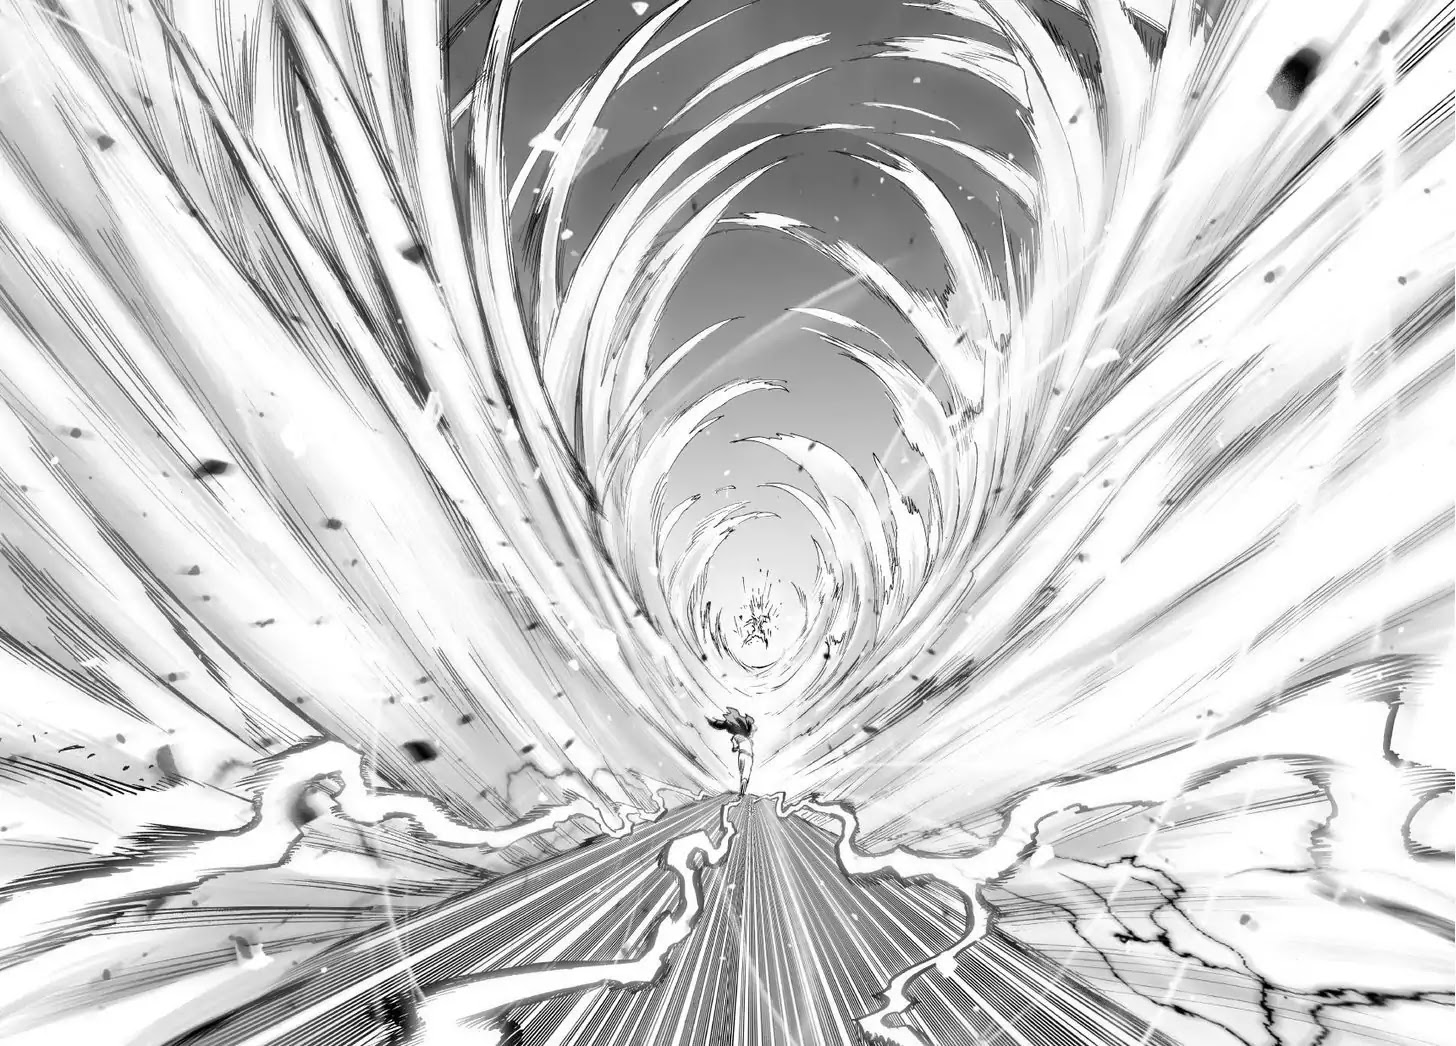 One Punch Man, Chapter 36 Boros S True Strength image 42